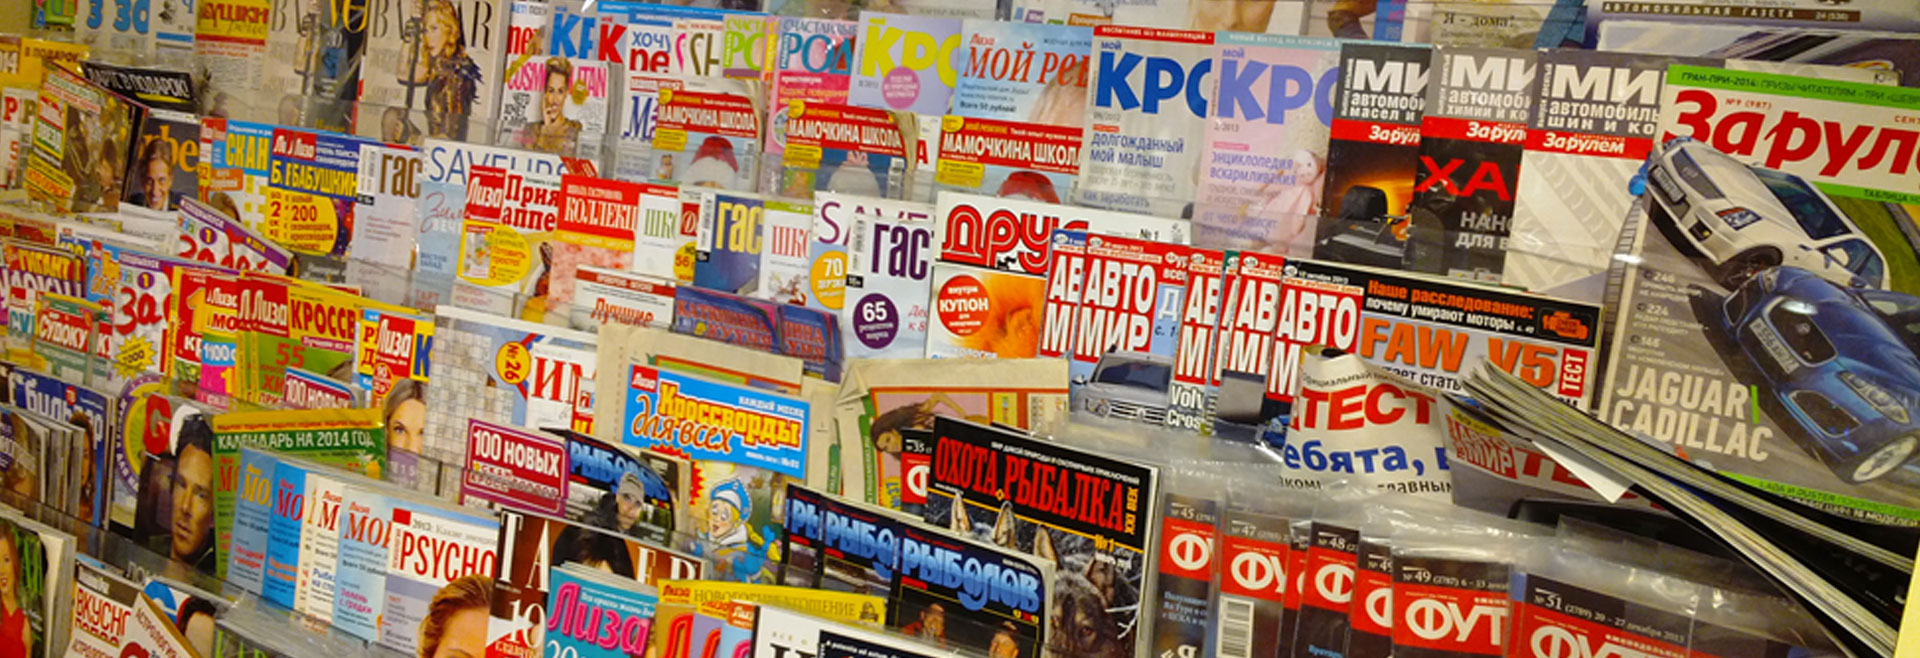 Magazines and Newspapers header image